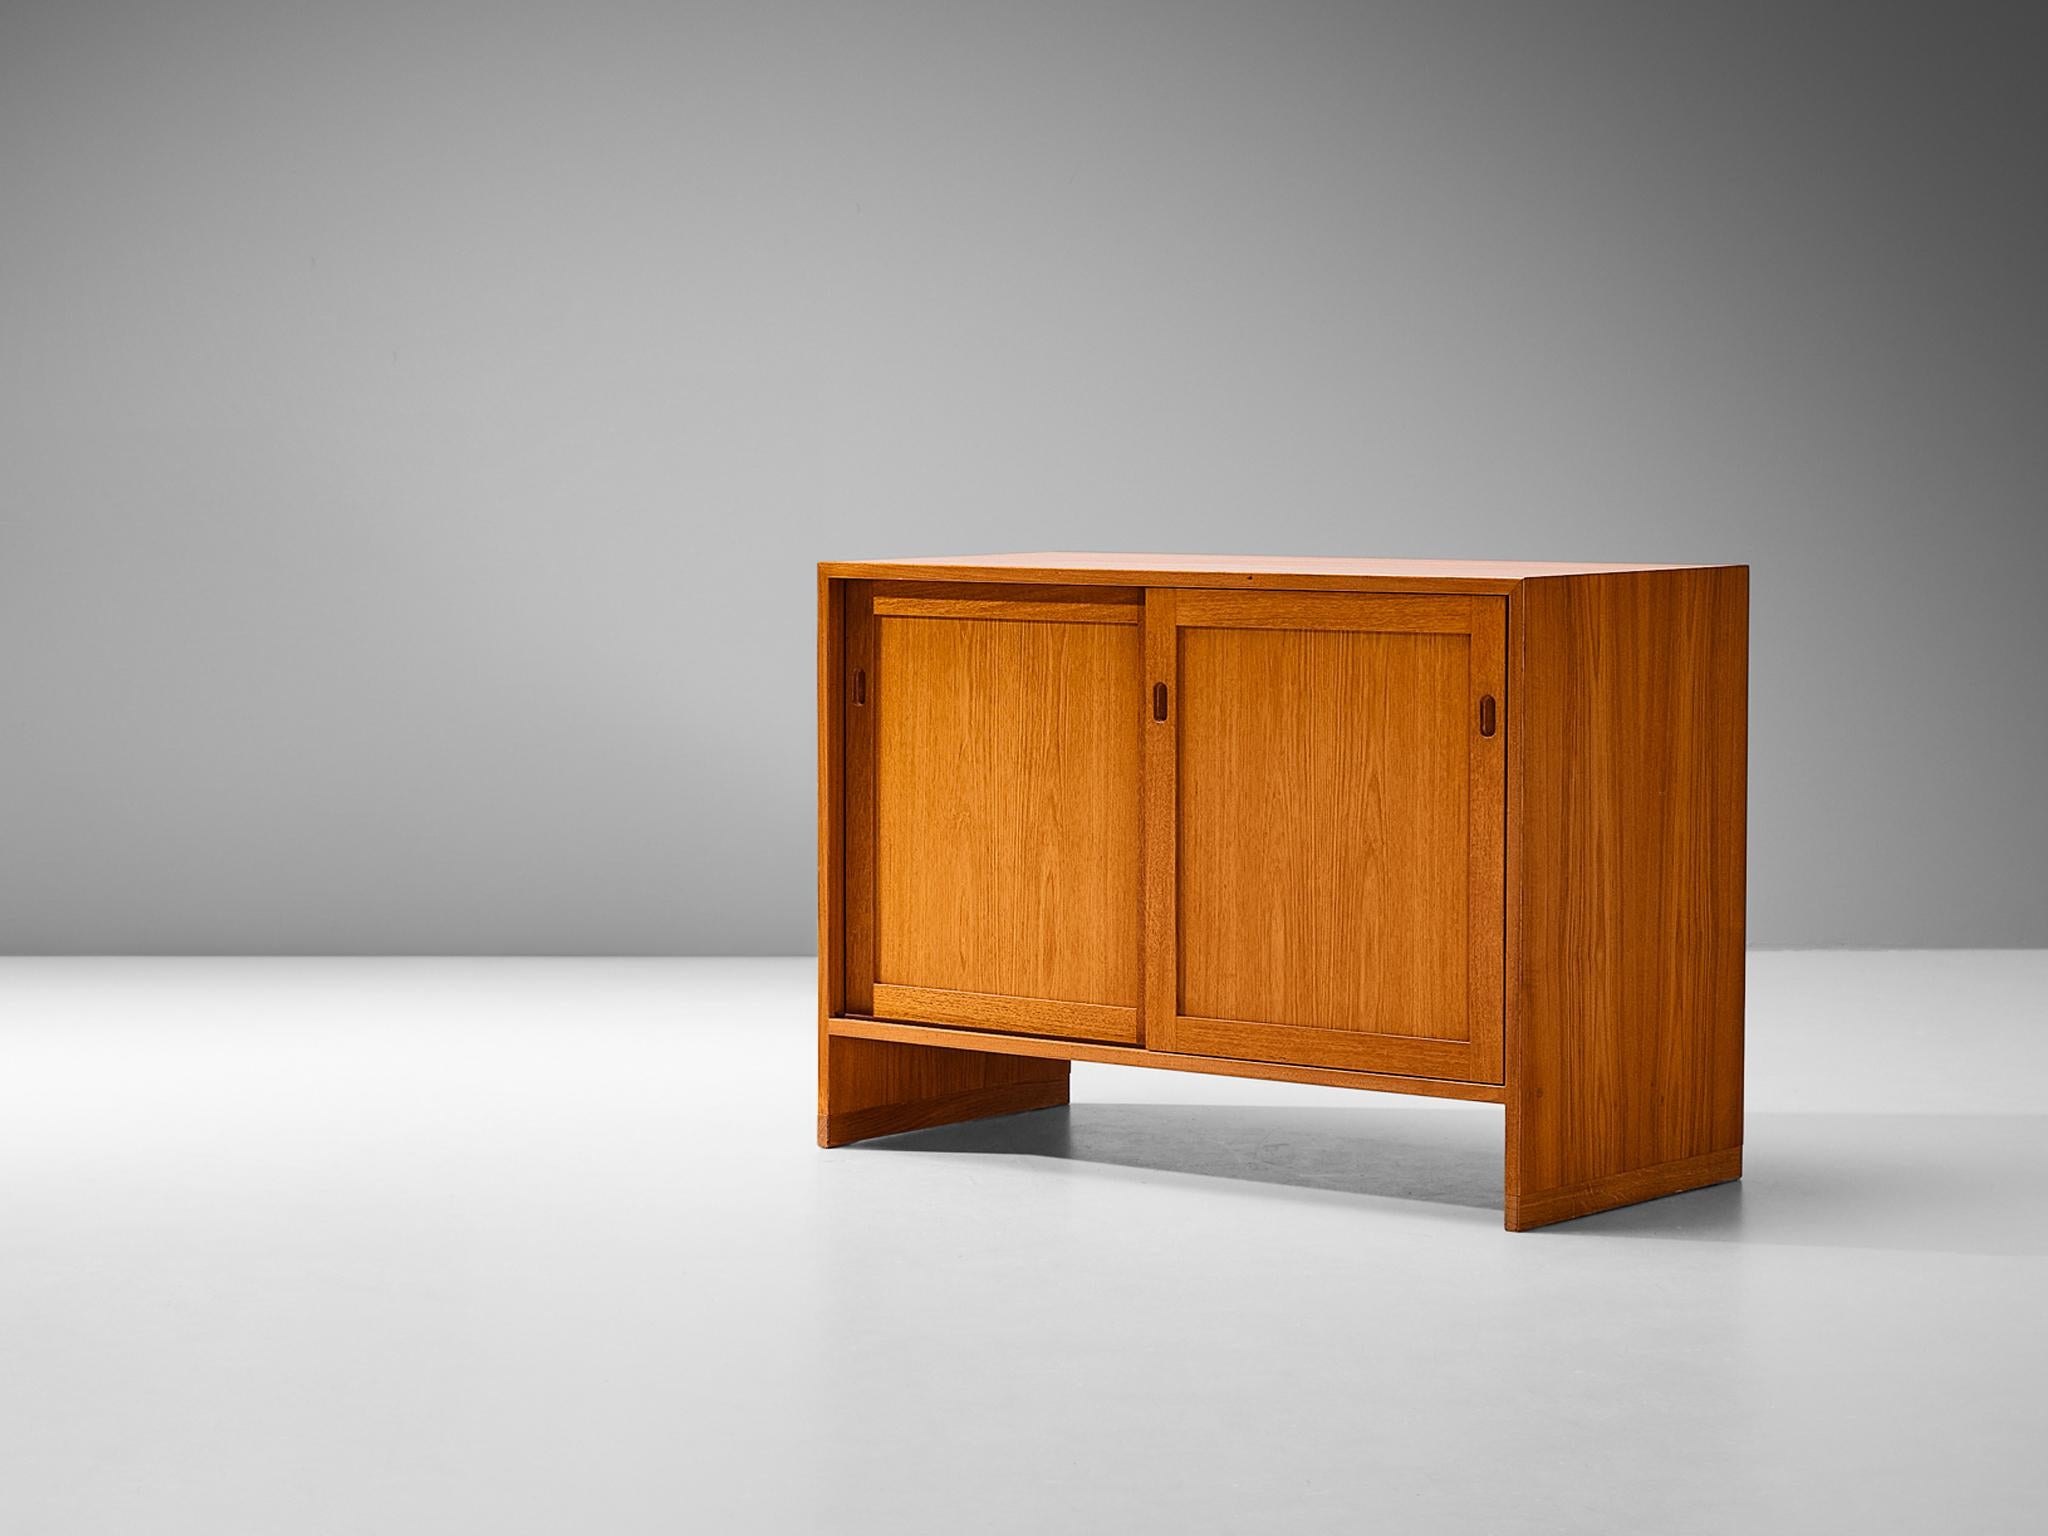 Hans J. Wegner for Ry Møbler, cabinet, model 'RY100', teak, oak, maple, Denmark, 1960

Beautiful cabinet designed by Danish furniture master Hans J. Wegner for Ry Møbler. This piece displays a symmetrically structured appearance defined by the clear